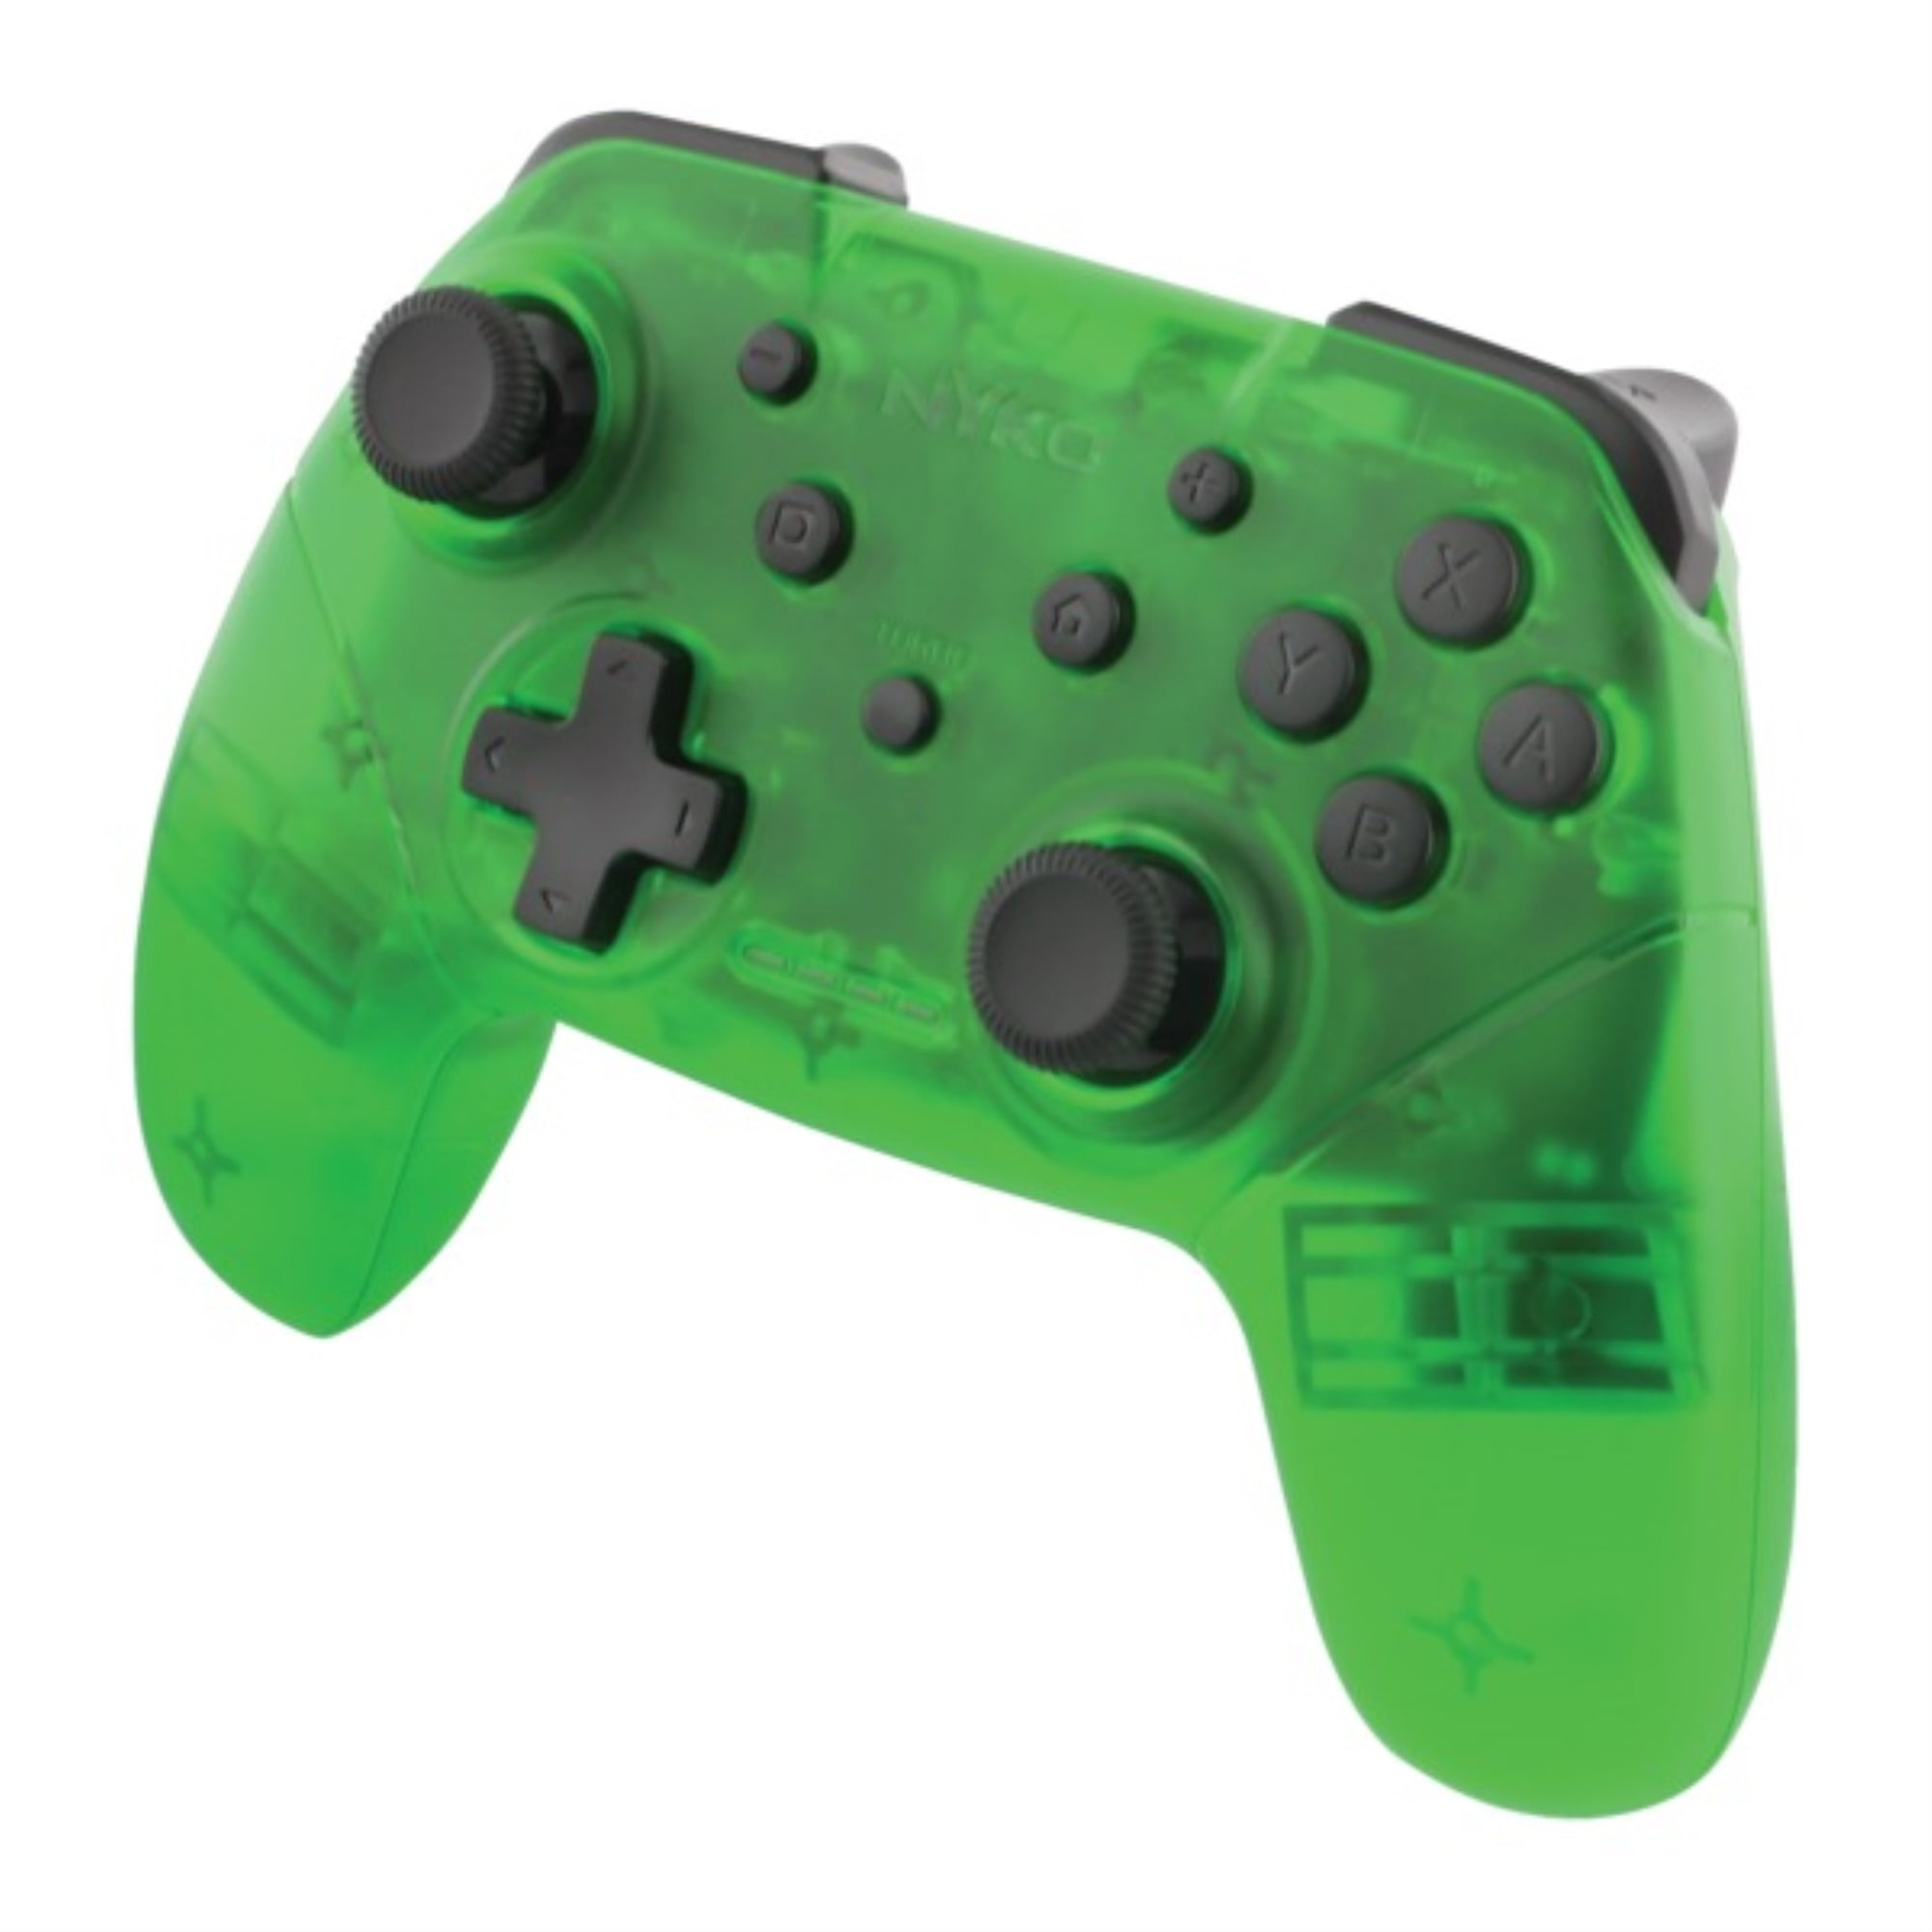 87264ny Wireless Controller For Nintendo Switch - Green